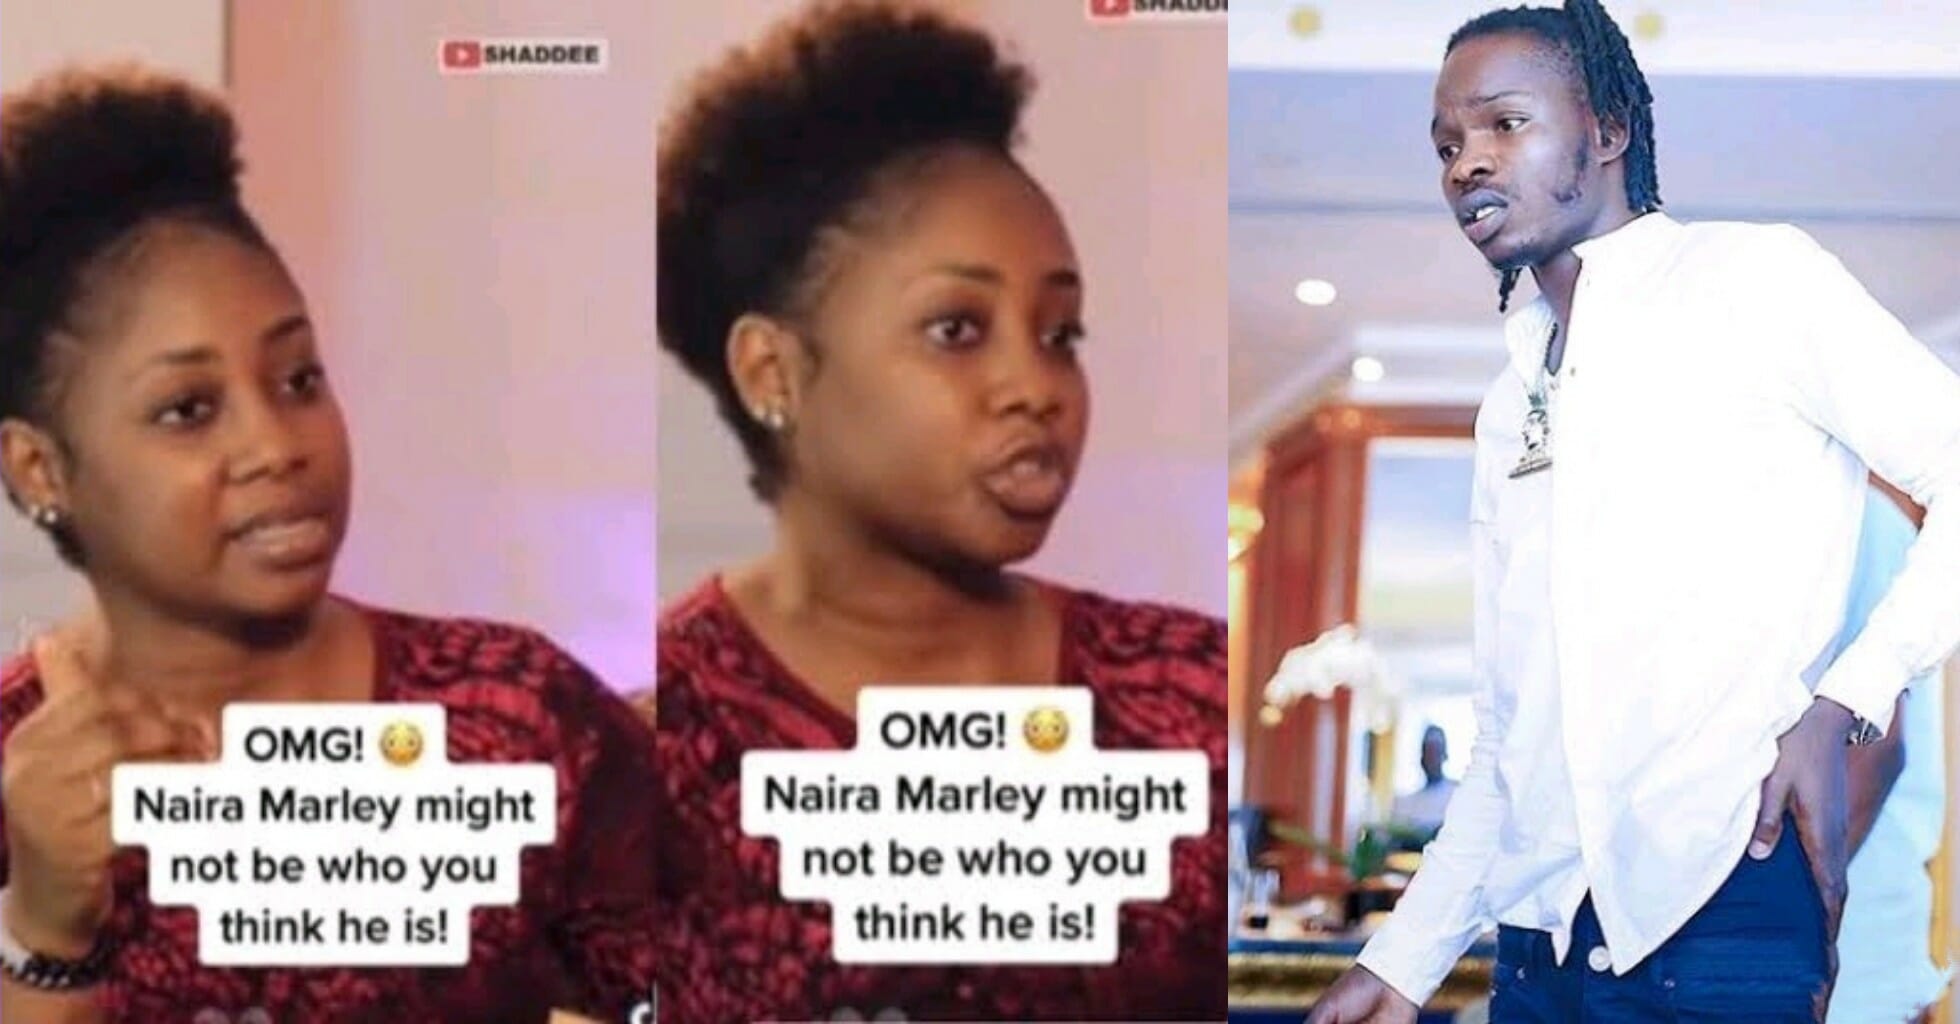 “6 days, he didn’t go out”, Lady who lived in Naira Marley’s compound spills his true nature